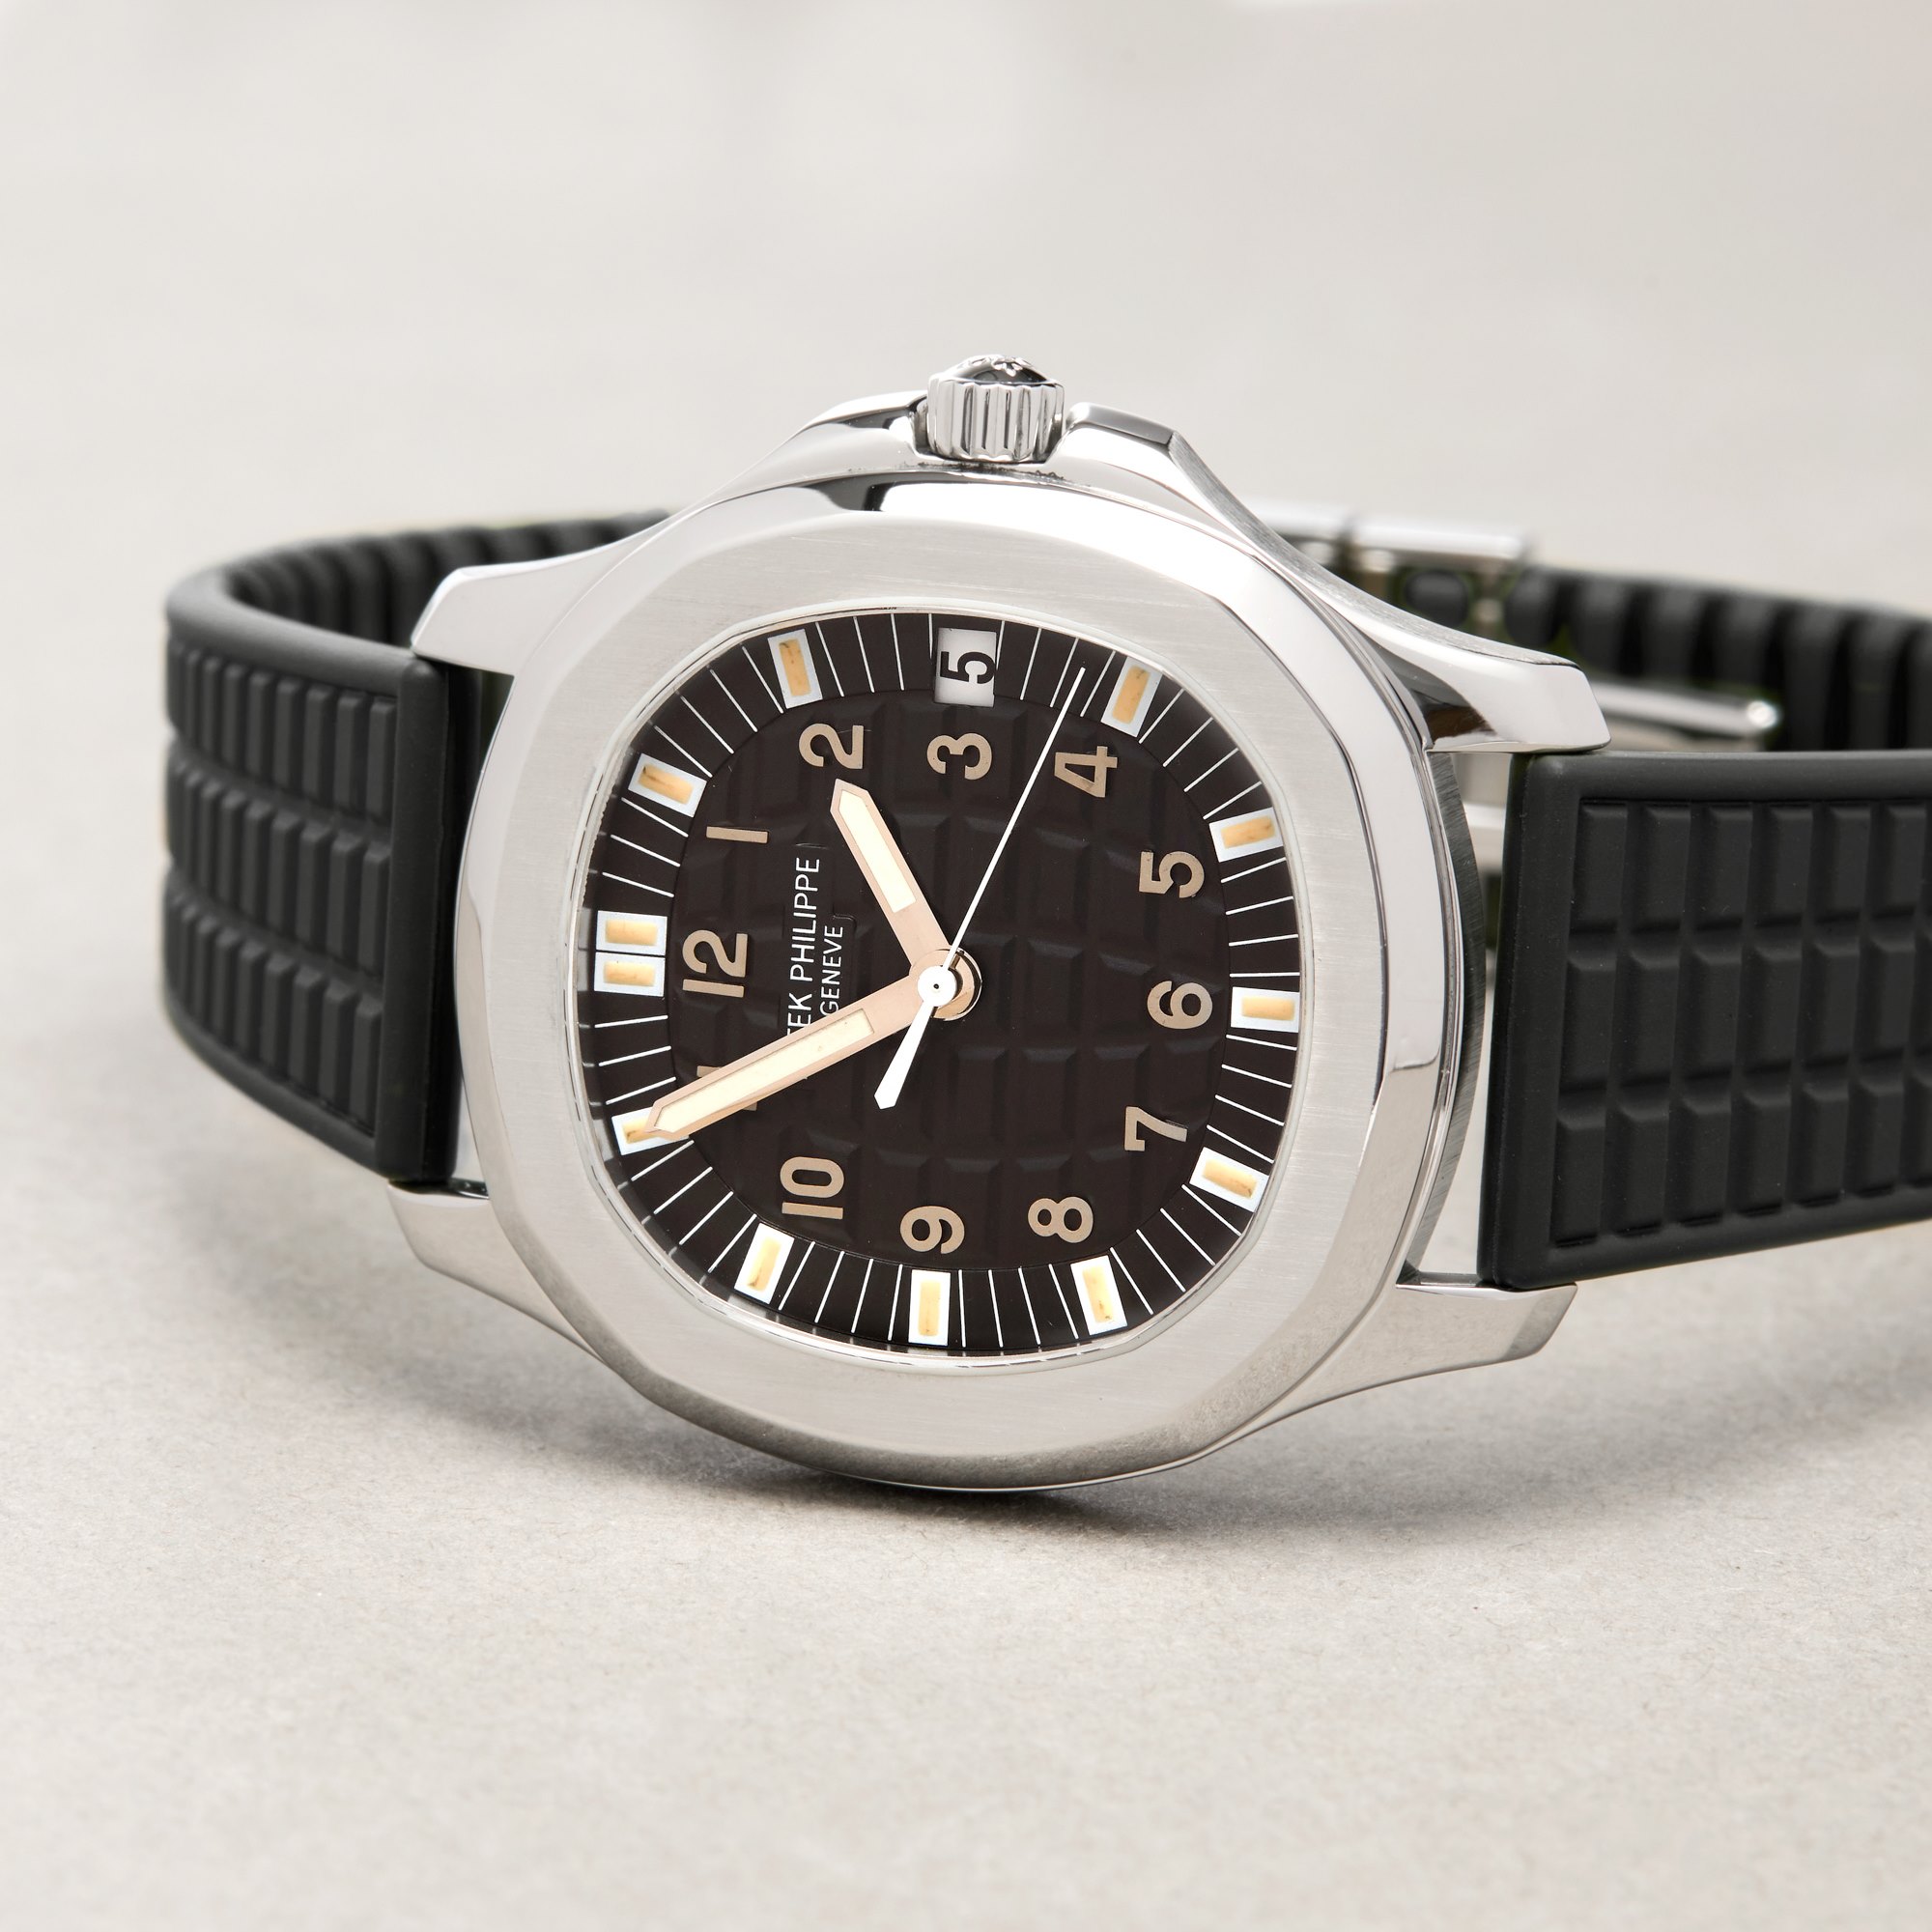 Patek Philippe Aquanaut Stainless Steel 5065/1A-001